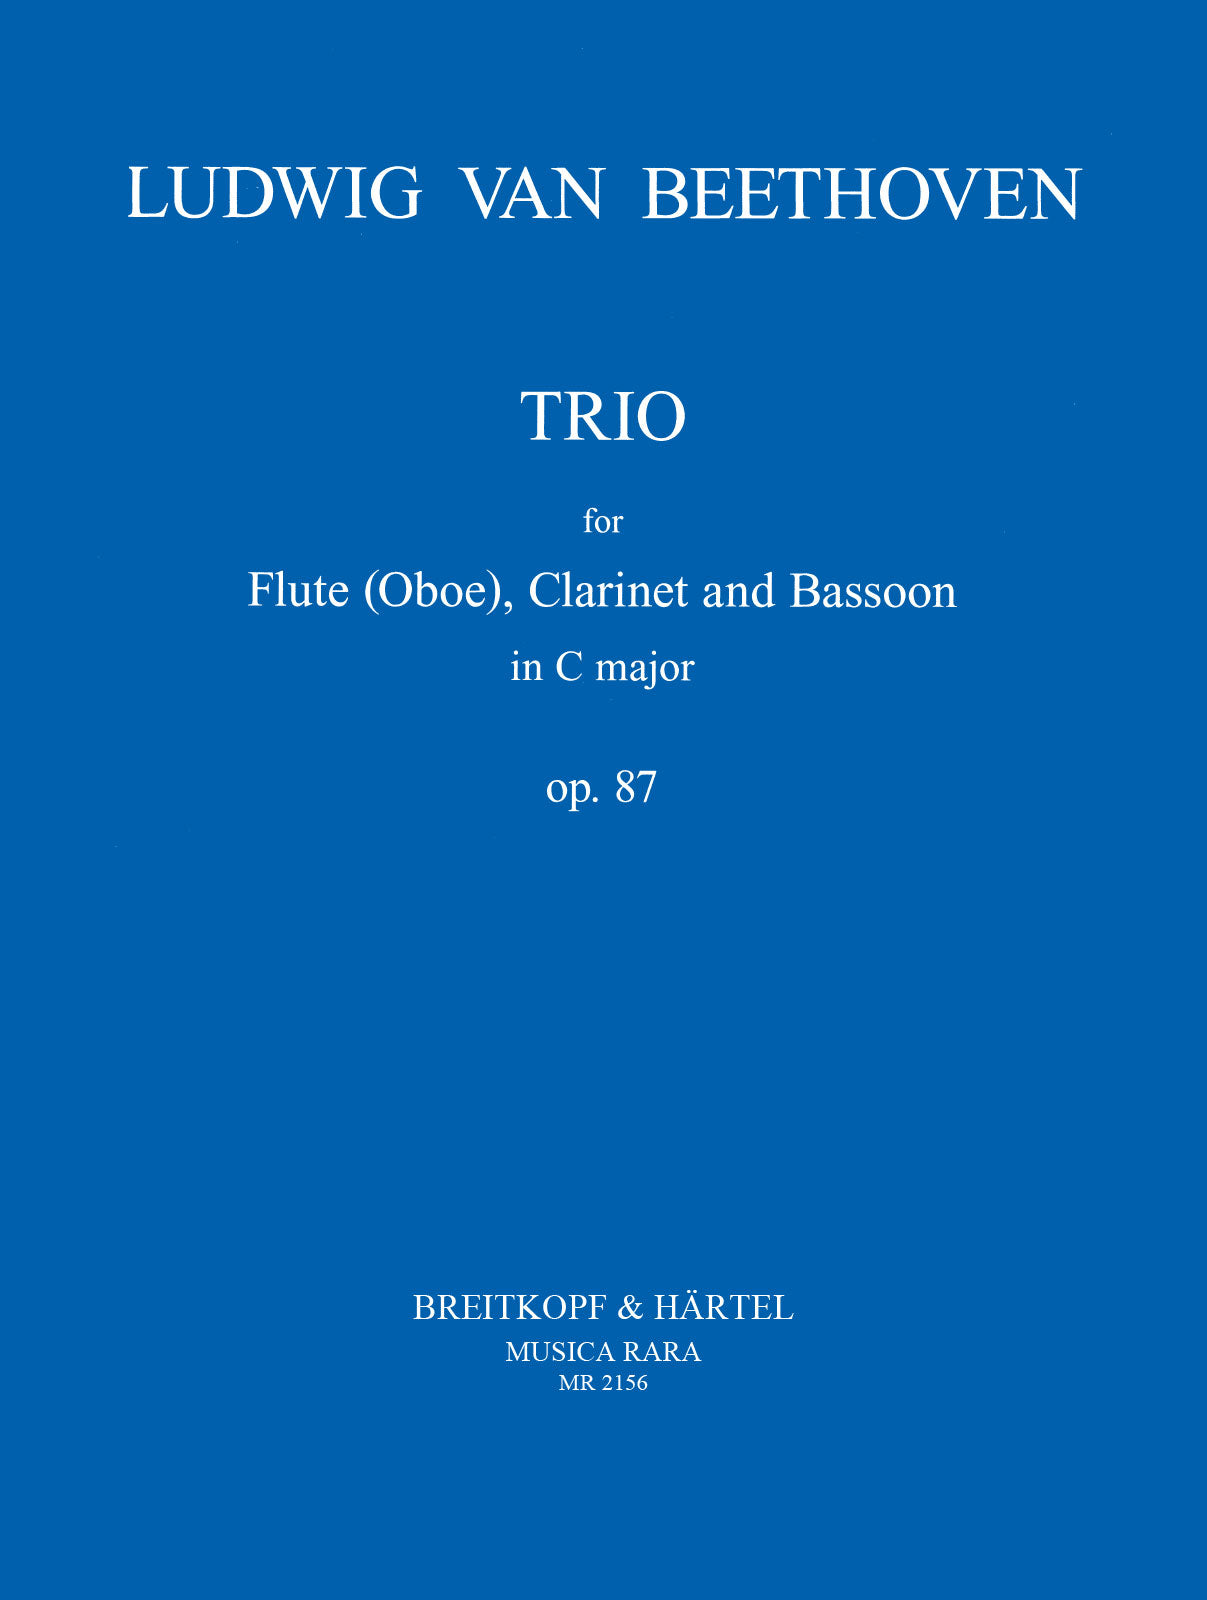 Beethoven: Trio, Op. 87 (arr. for flute/oboe, clarinet & bassoon)